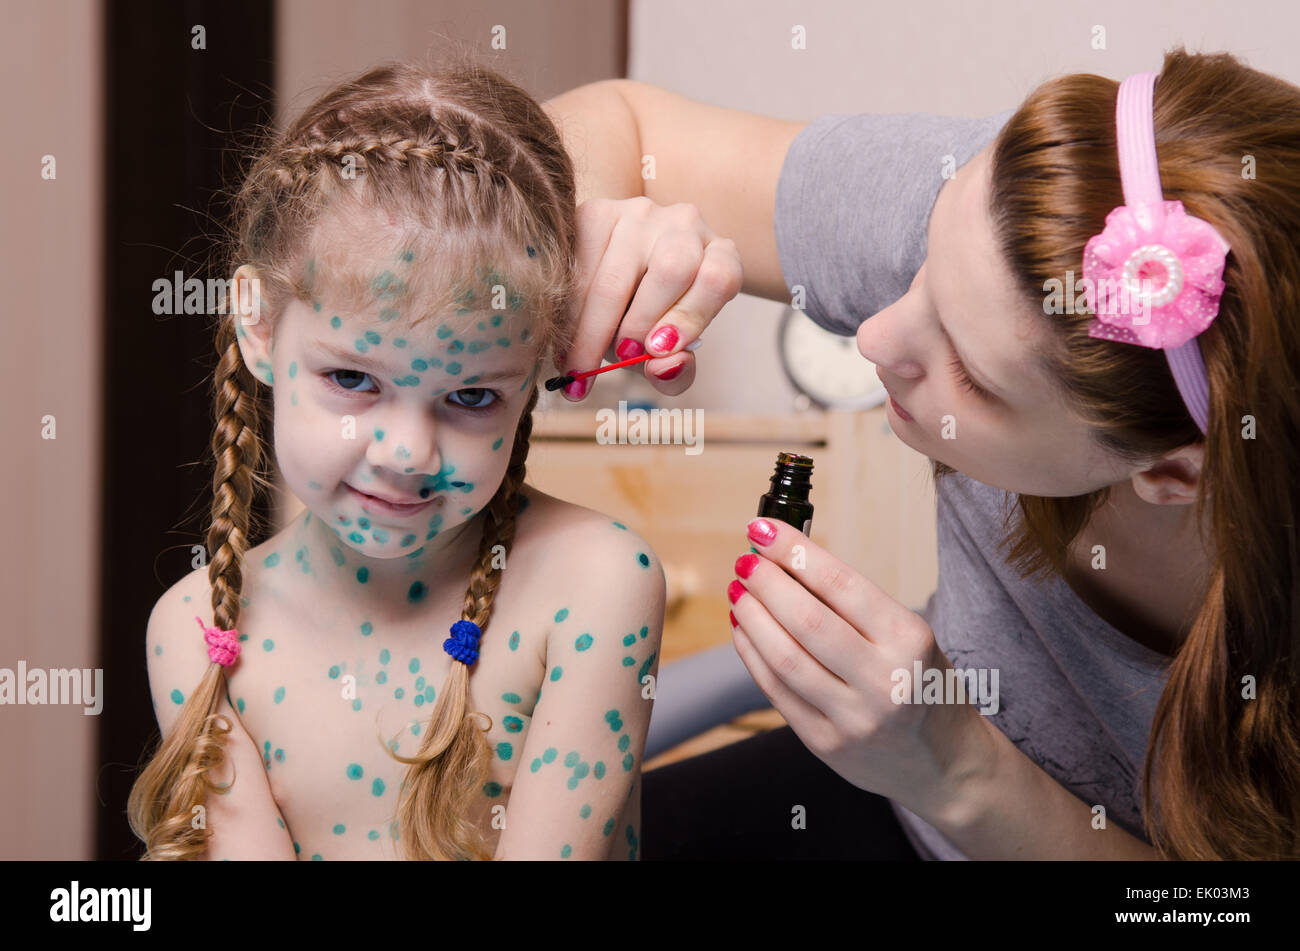 Mom misses zelenkoj sores on the face of a child suffering from chickenpox Stock Photo